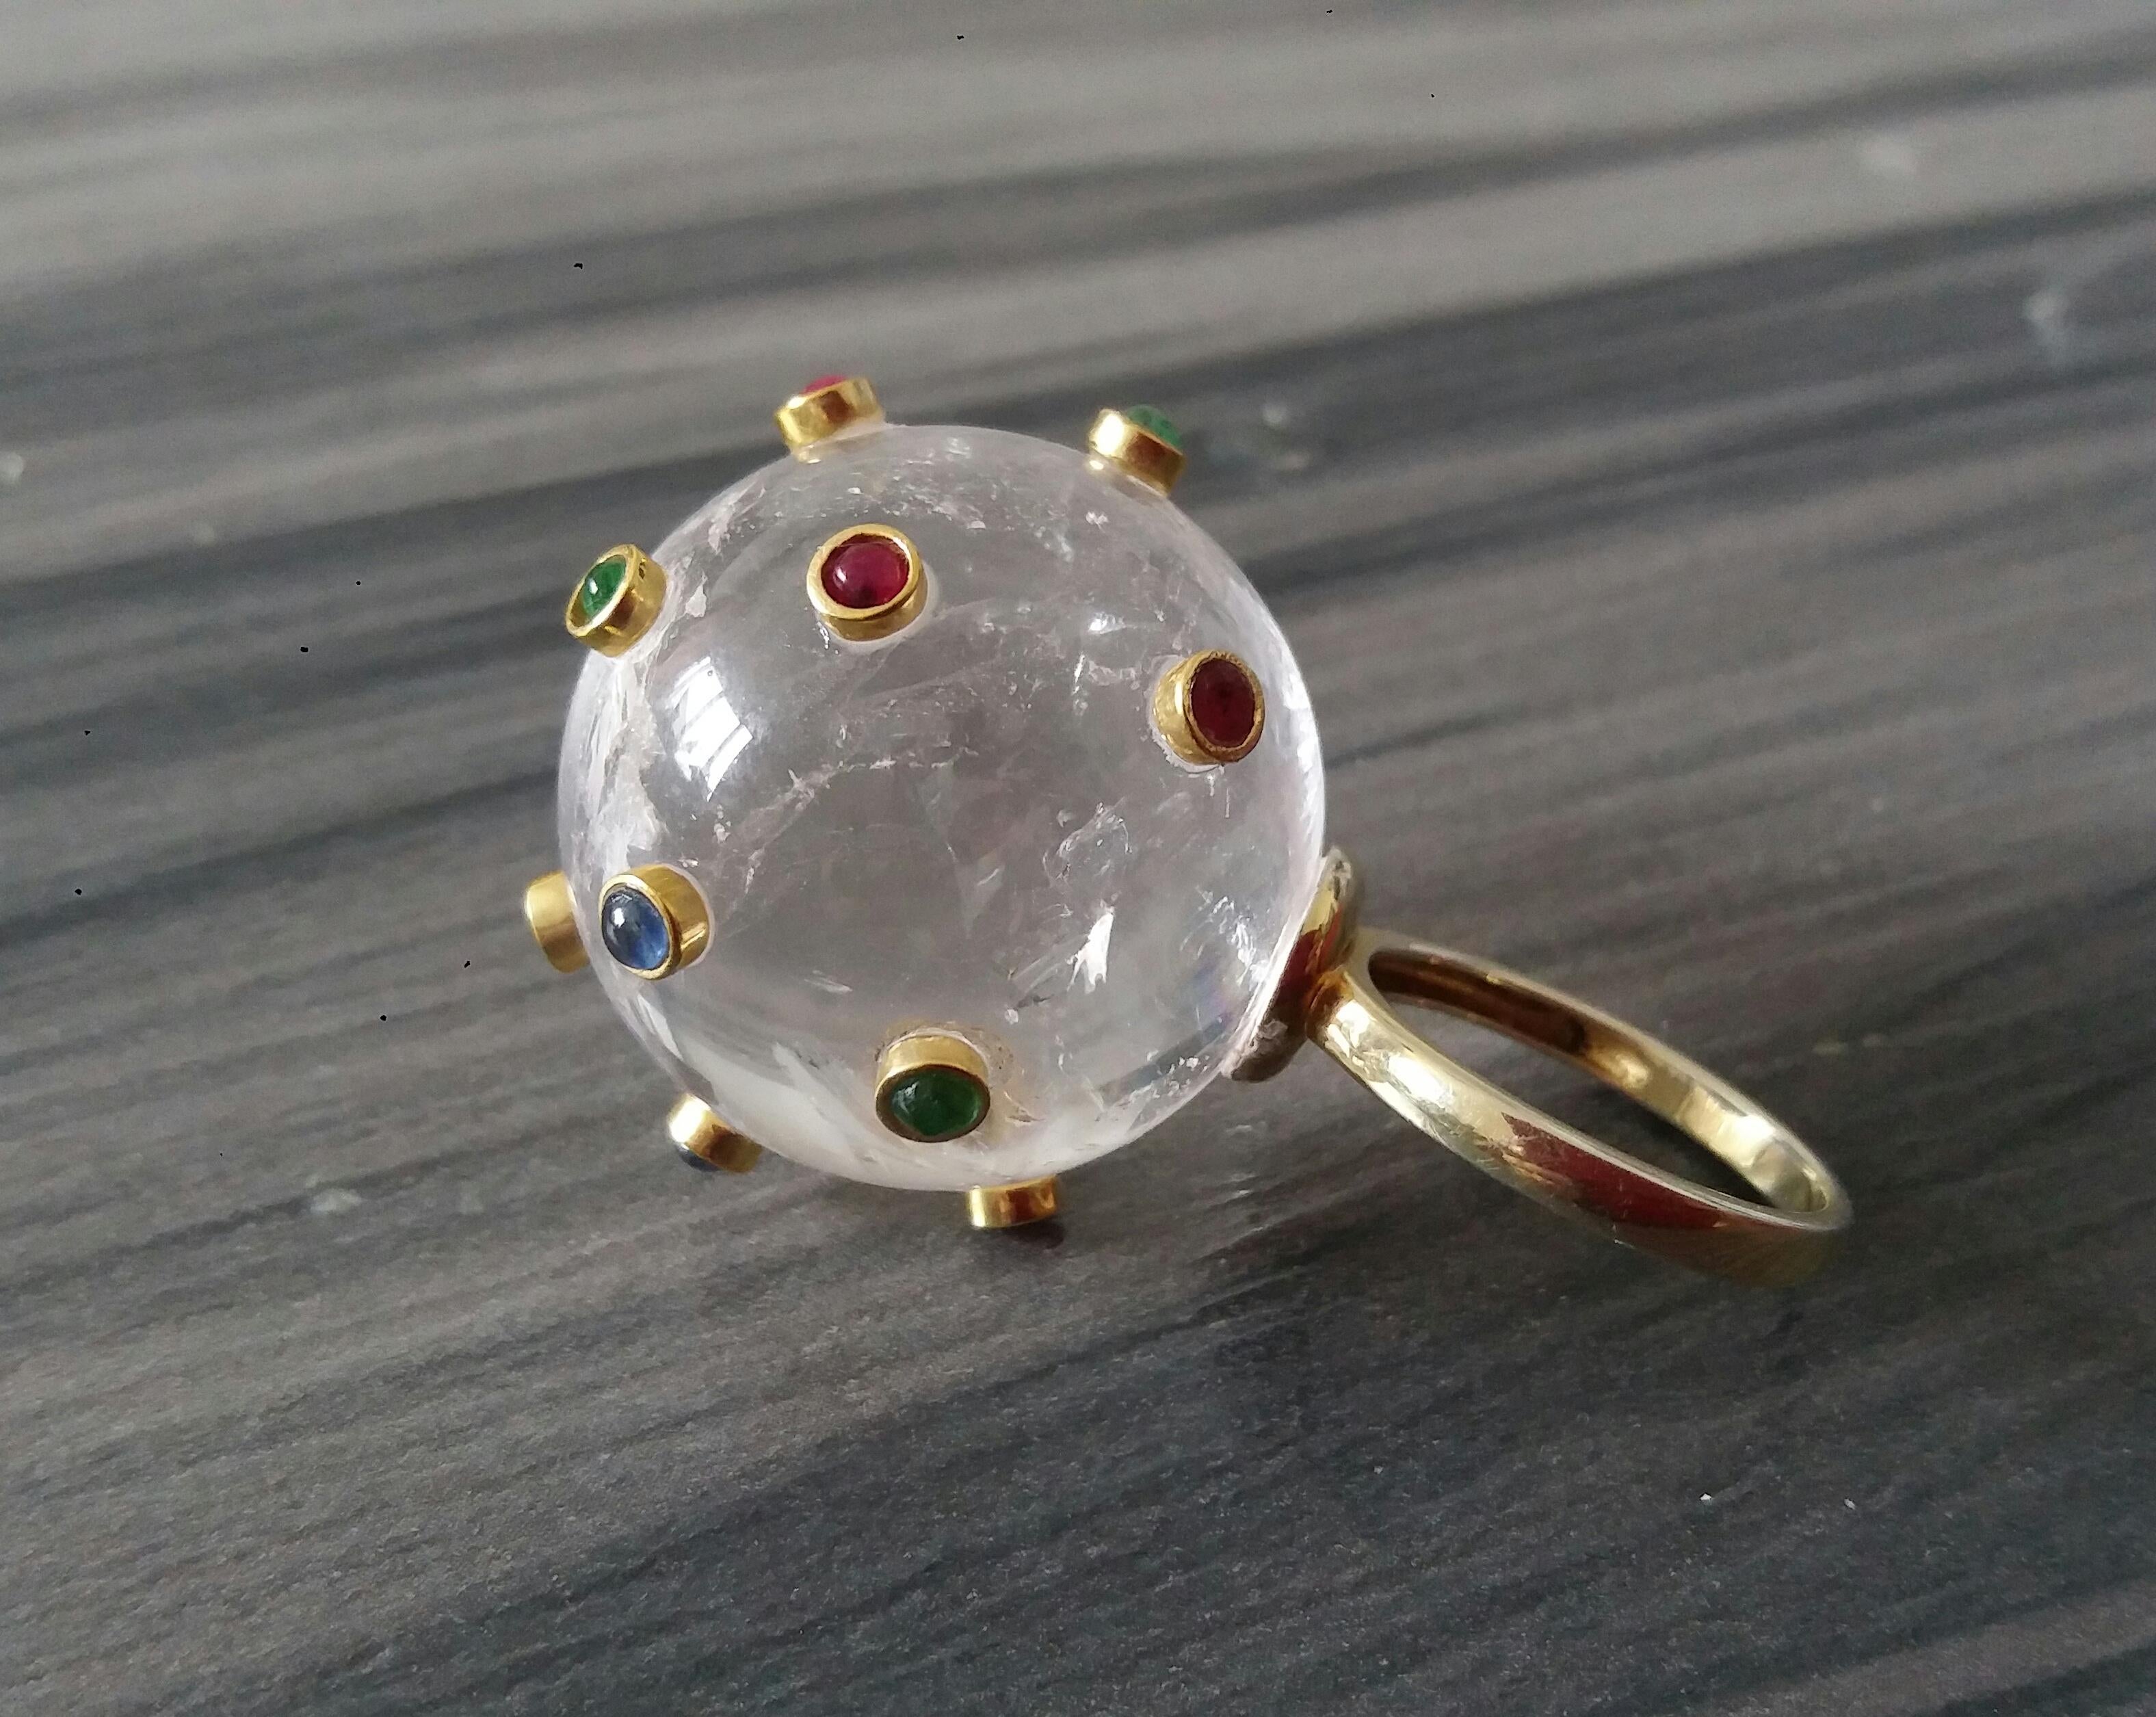 150 Carat Natural Quartz Ball Rubies Emeralds Sapphires Round Cabs 14K Gold Ring For Sale 3